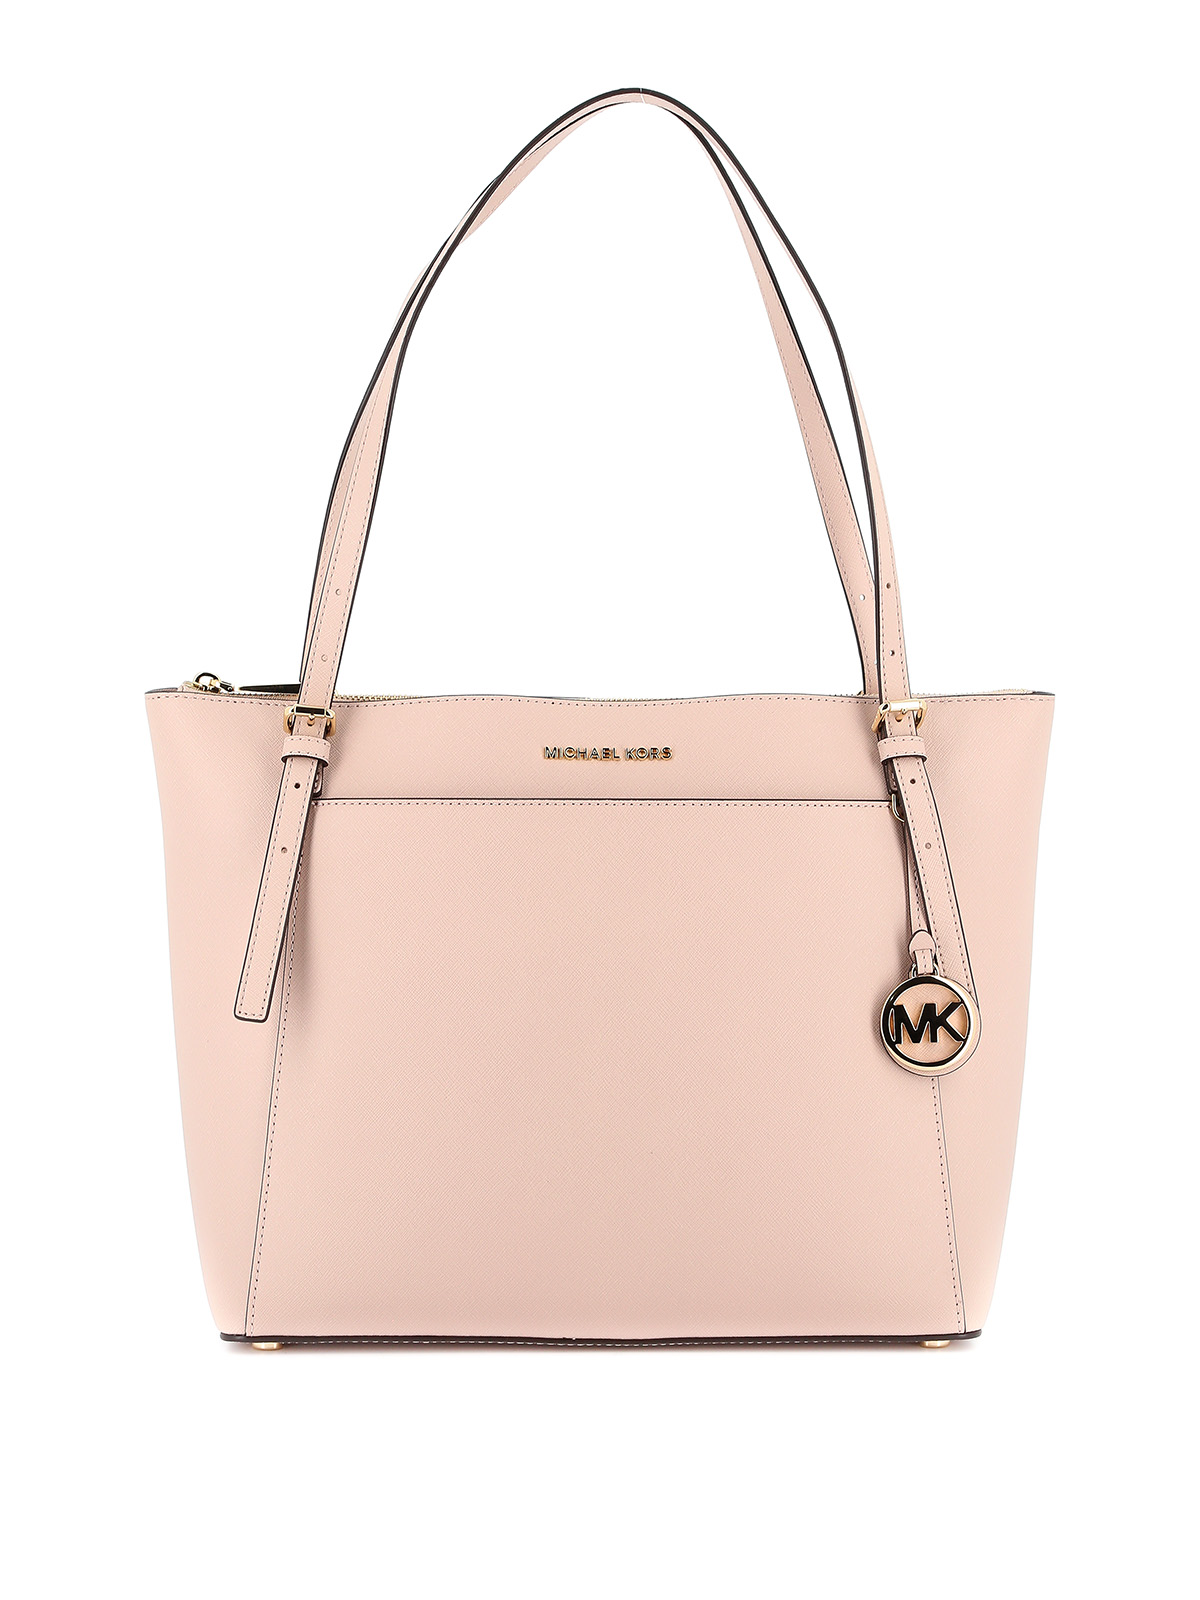 Michael Kors - Voyager Large Saffiano Leather Top-Zip Tote Bag